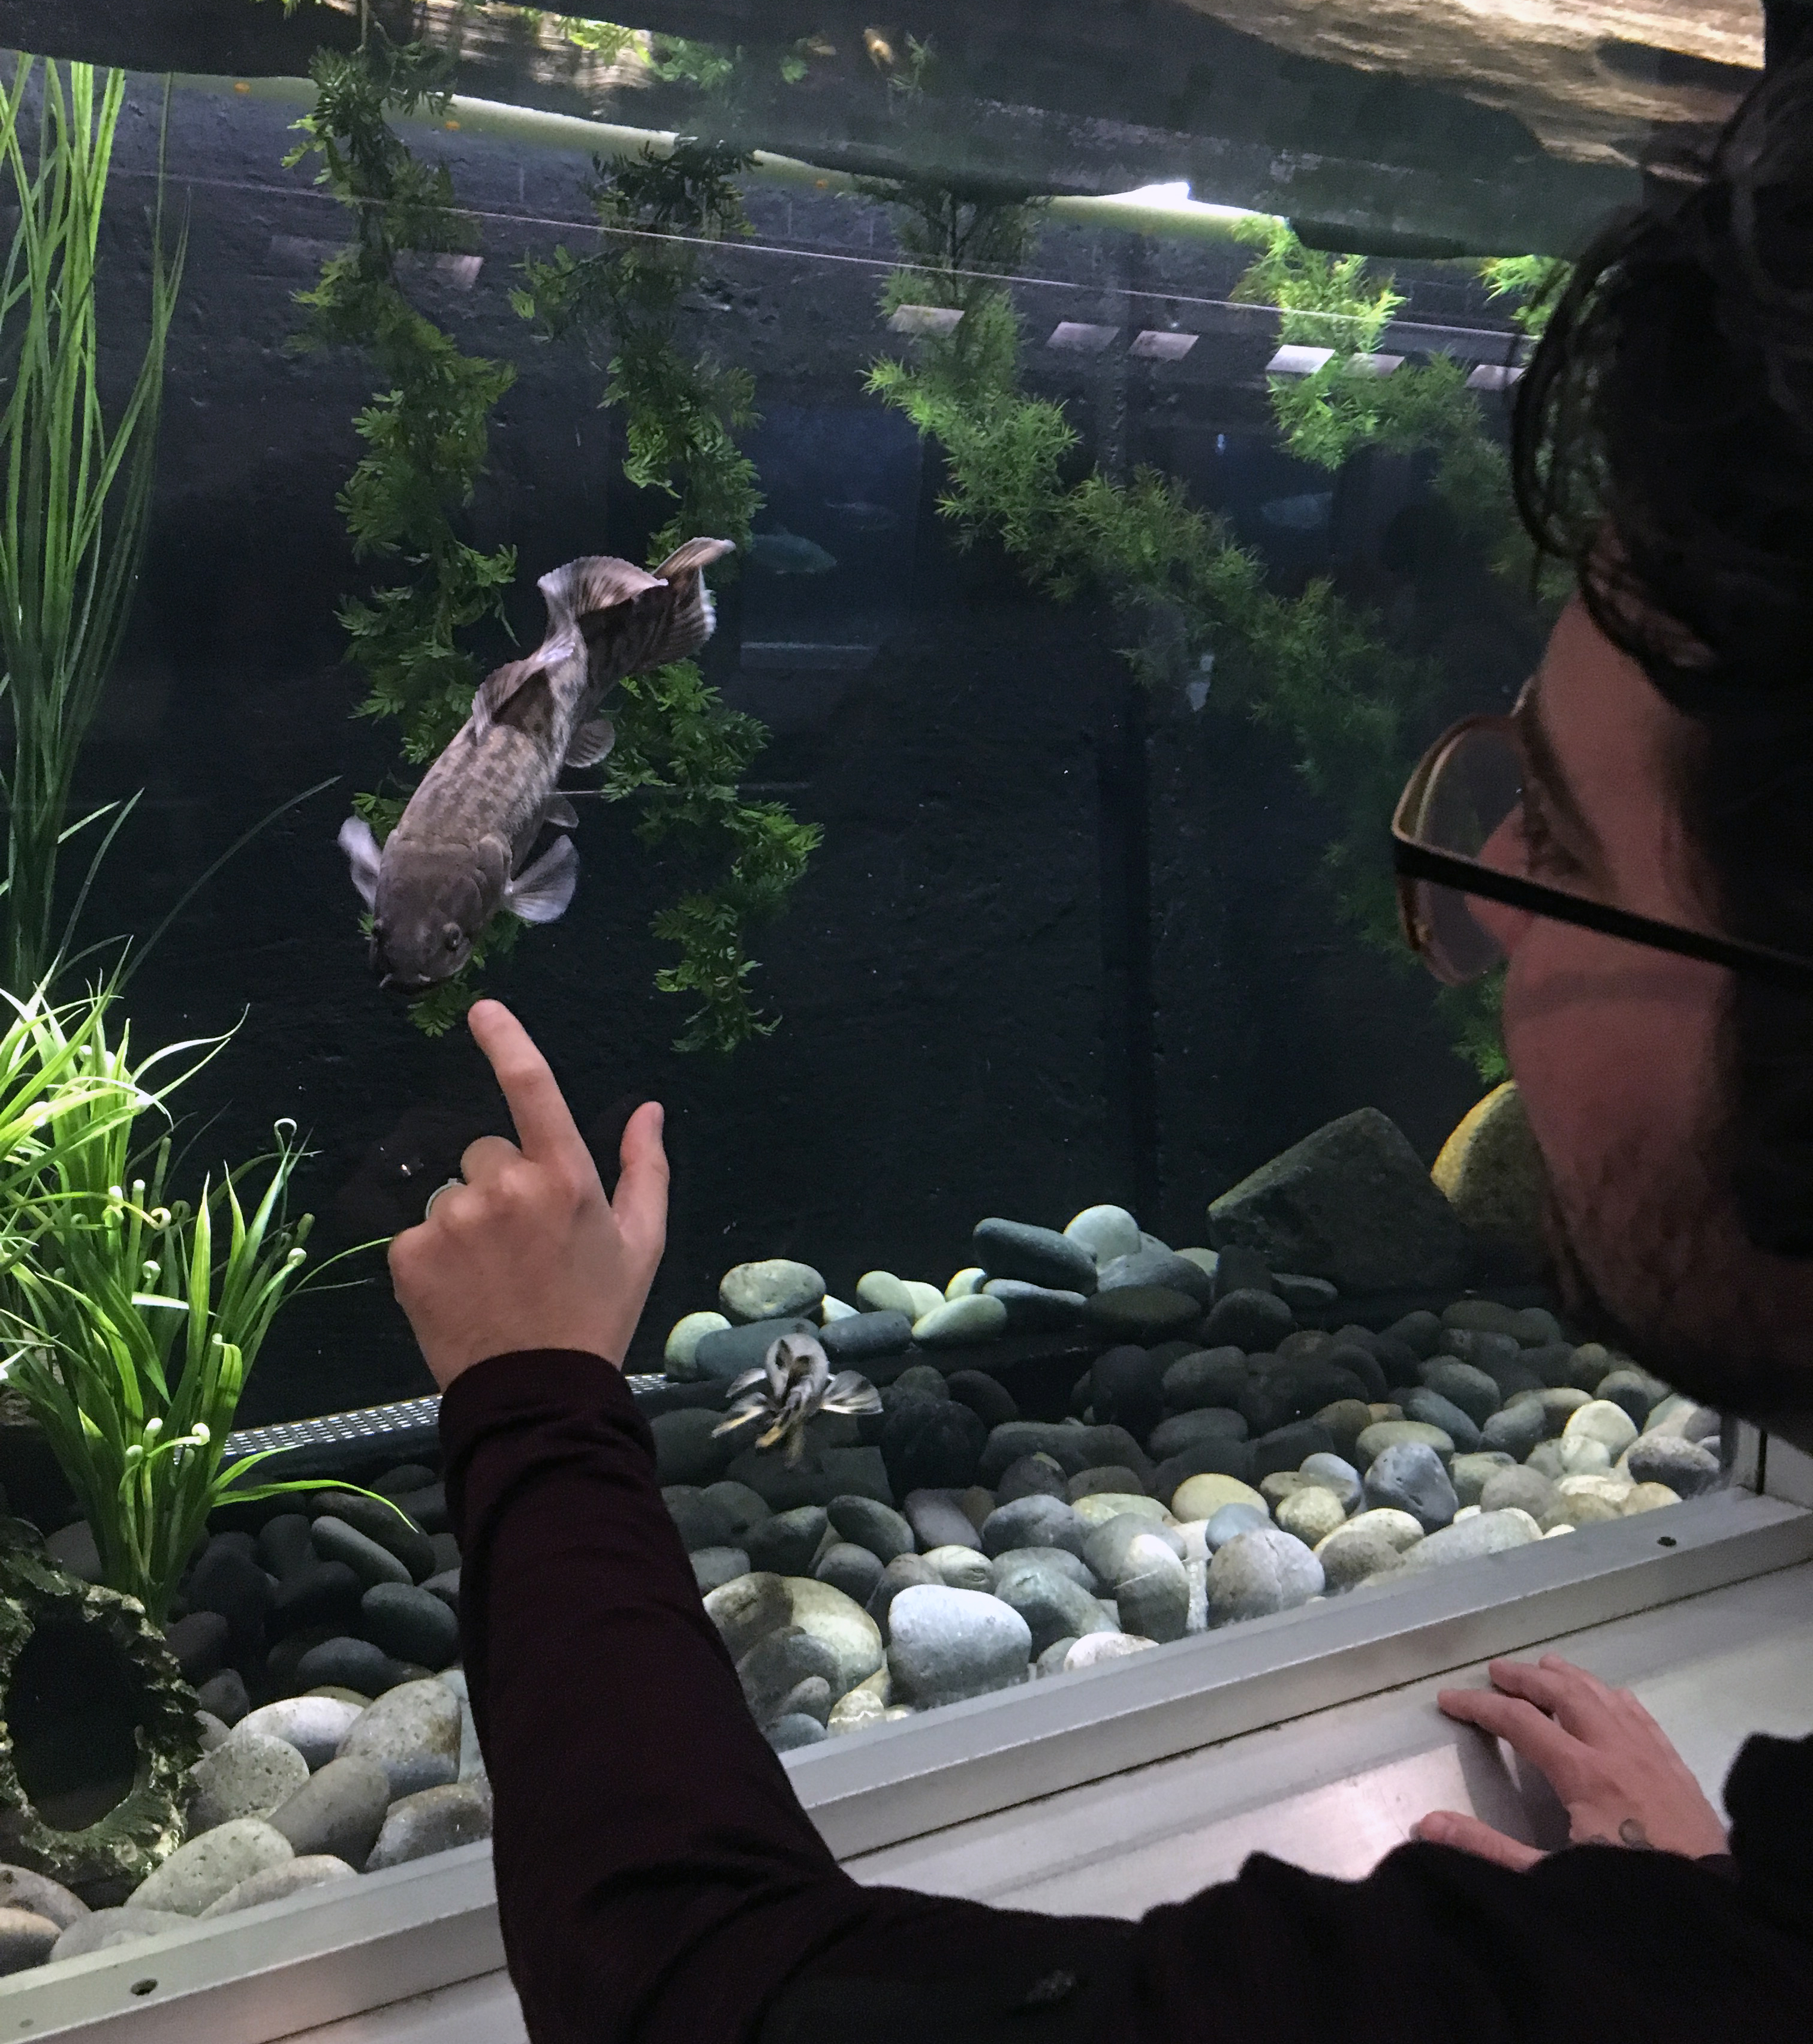 MSU postdoctoral researcher Andrew Thompson points at a bowfin swimming in a fish tank.